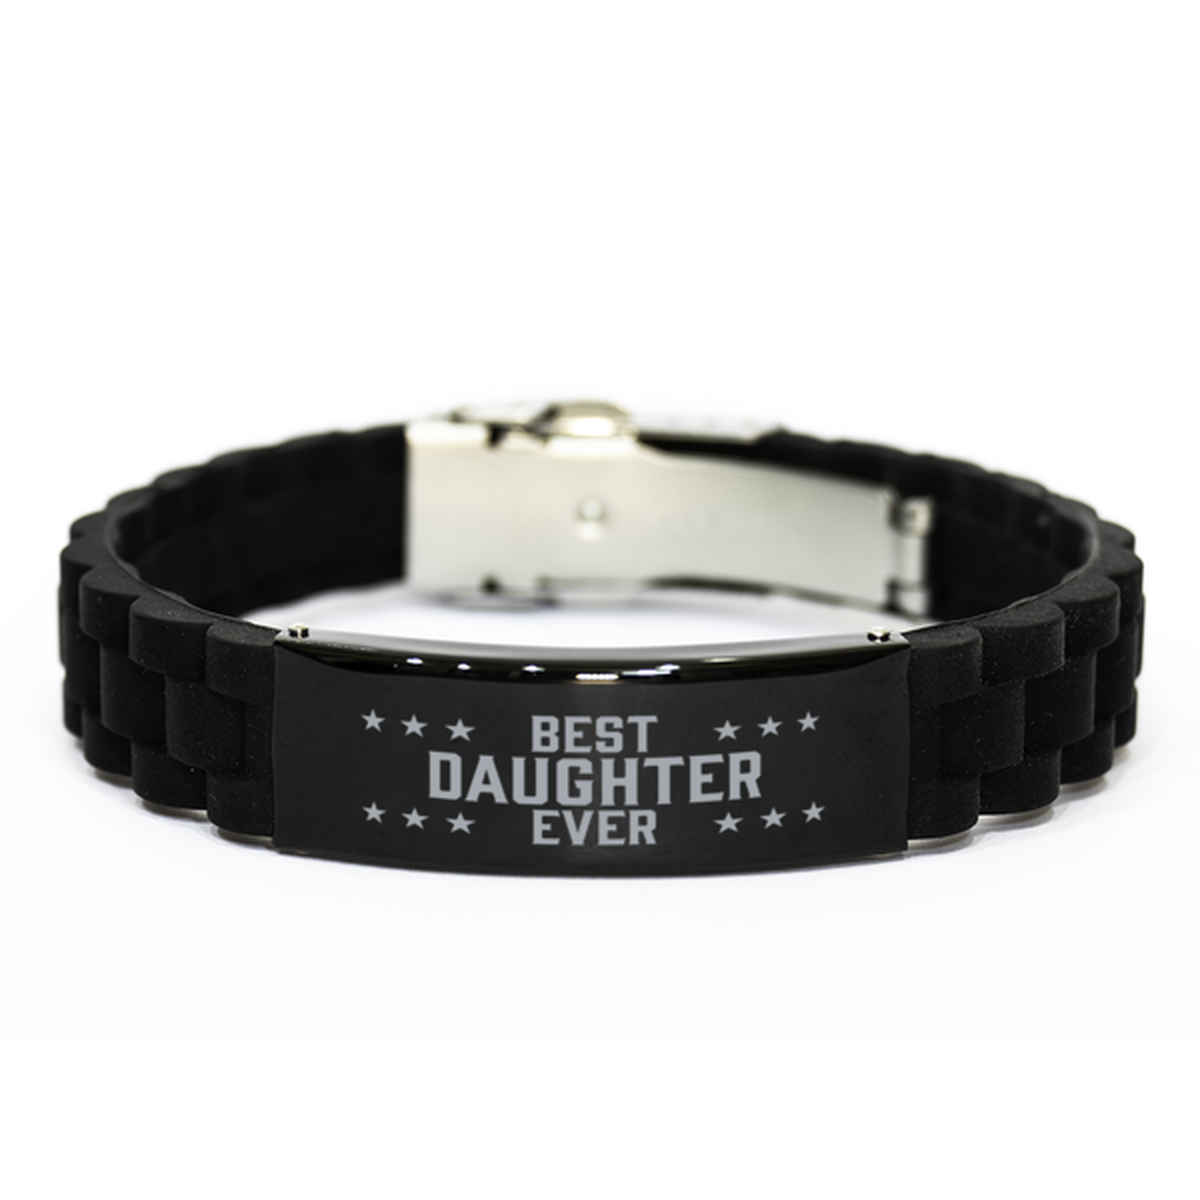 Best Daughter Ever Daughter Gifts, Funny Black Engraved Bracelet For Daughter, Family Gifts For Women